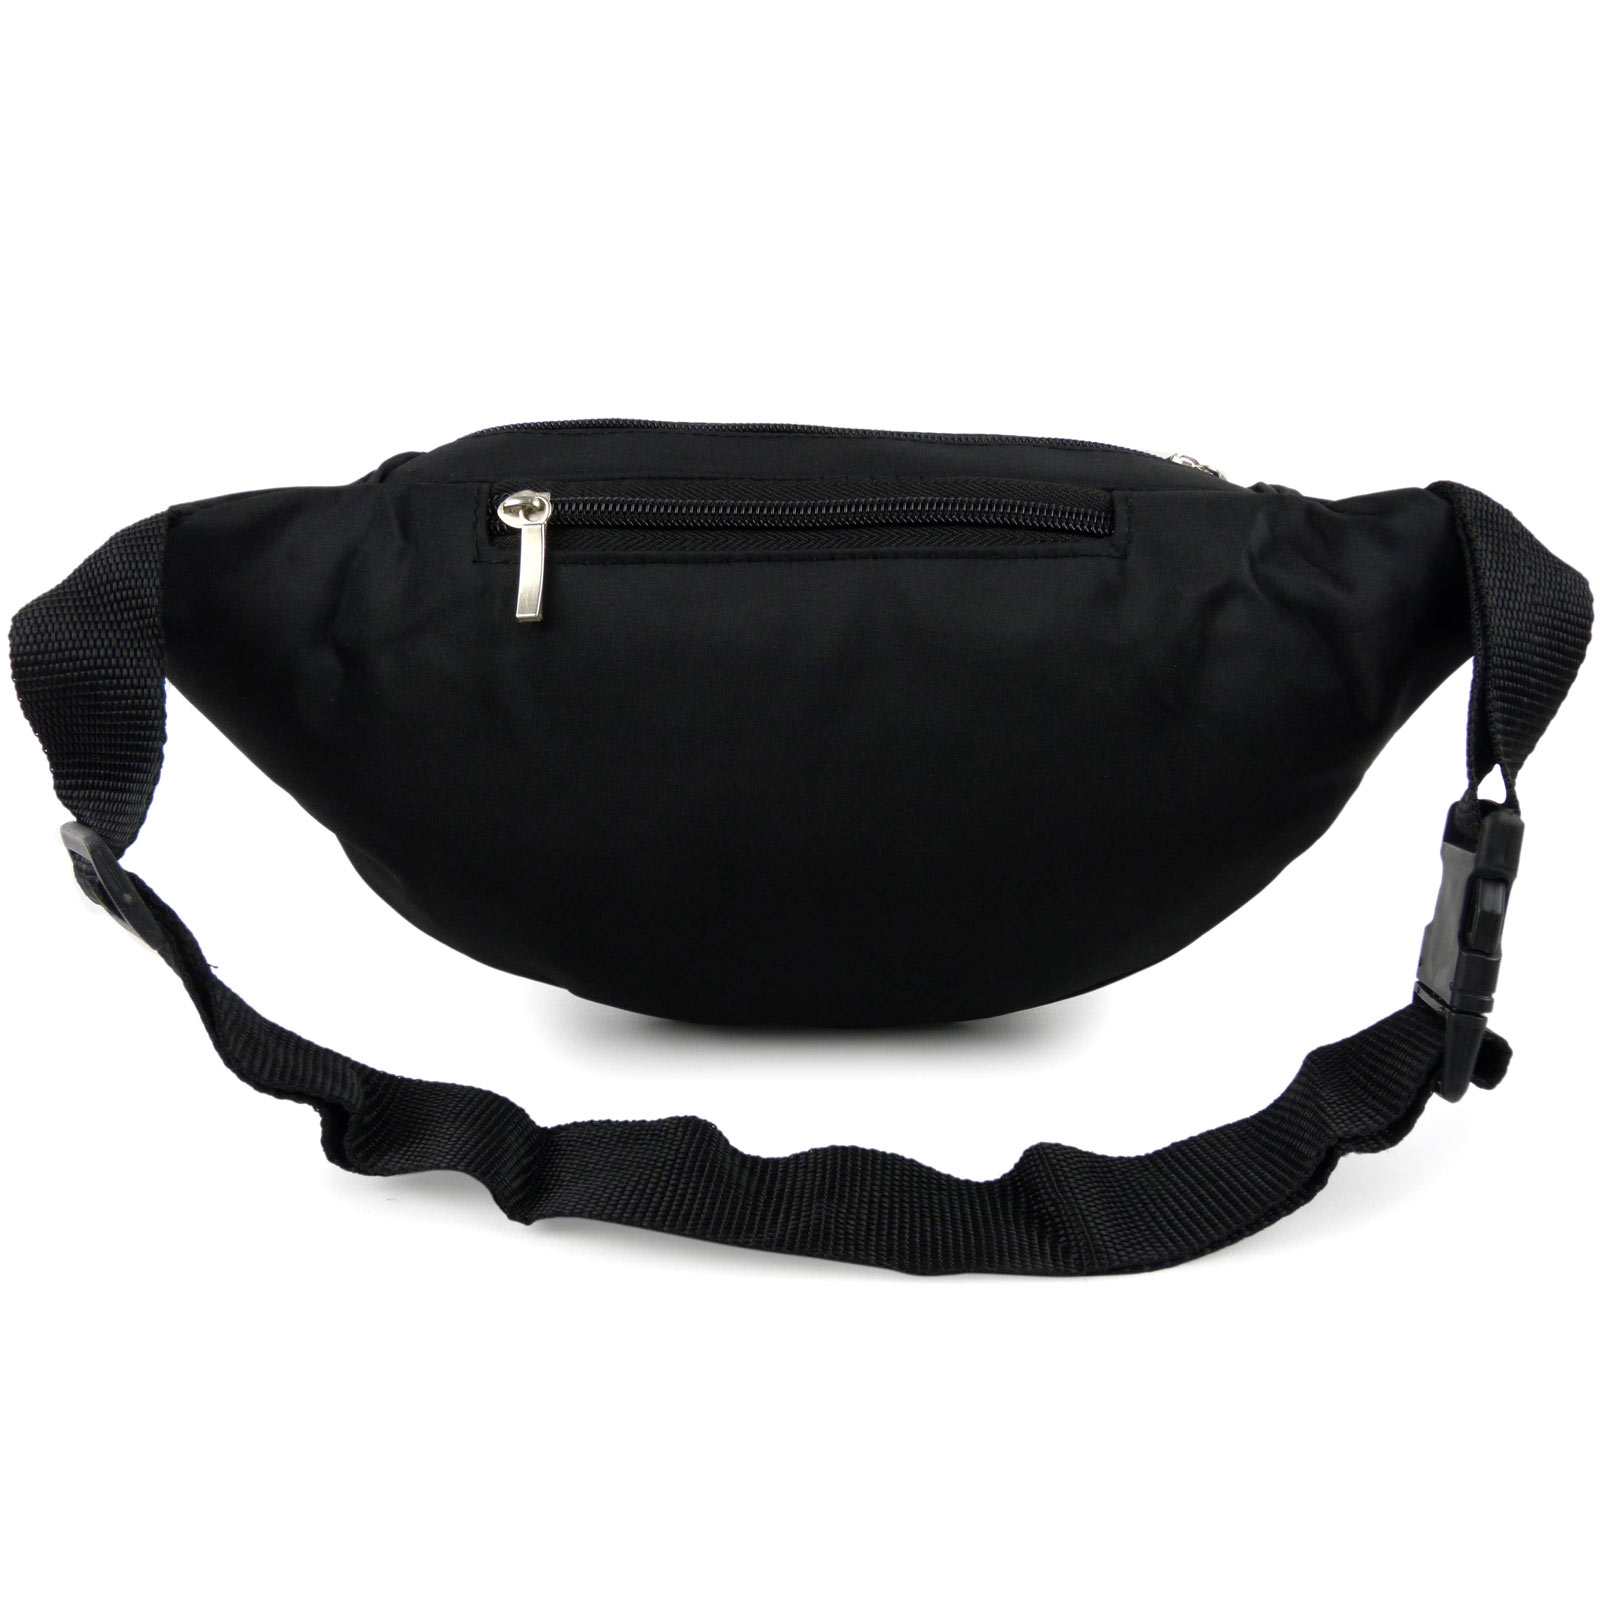 Microfibre Bum Bag with 6 Zipped Compartments Black 5055527712283 | eBay